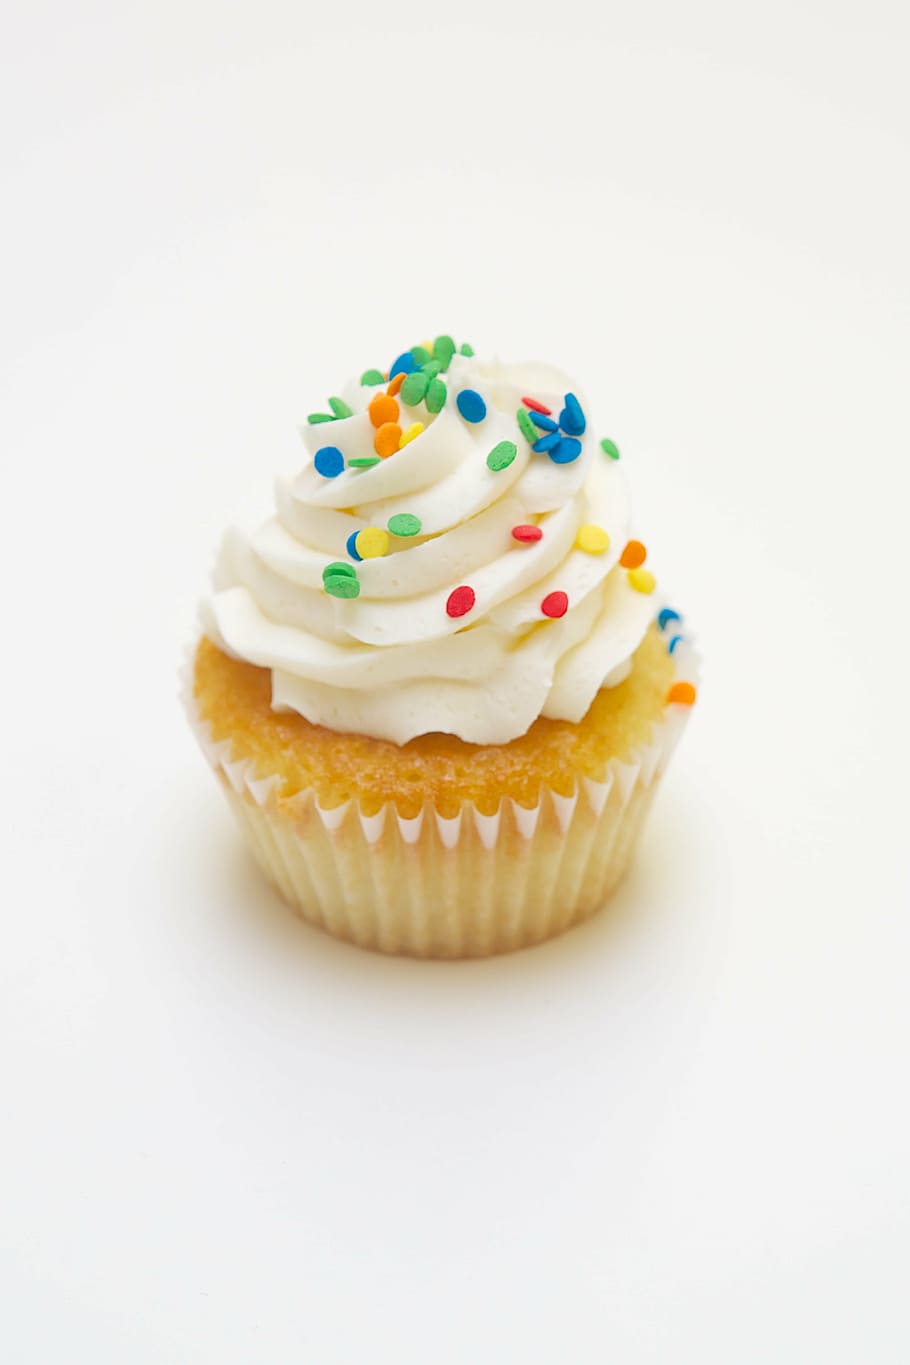 cupcake with icing, cupcake, dessert, sprinkles, pastry, delicious, sugar, icing, white, bakery